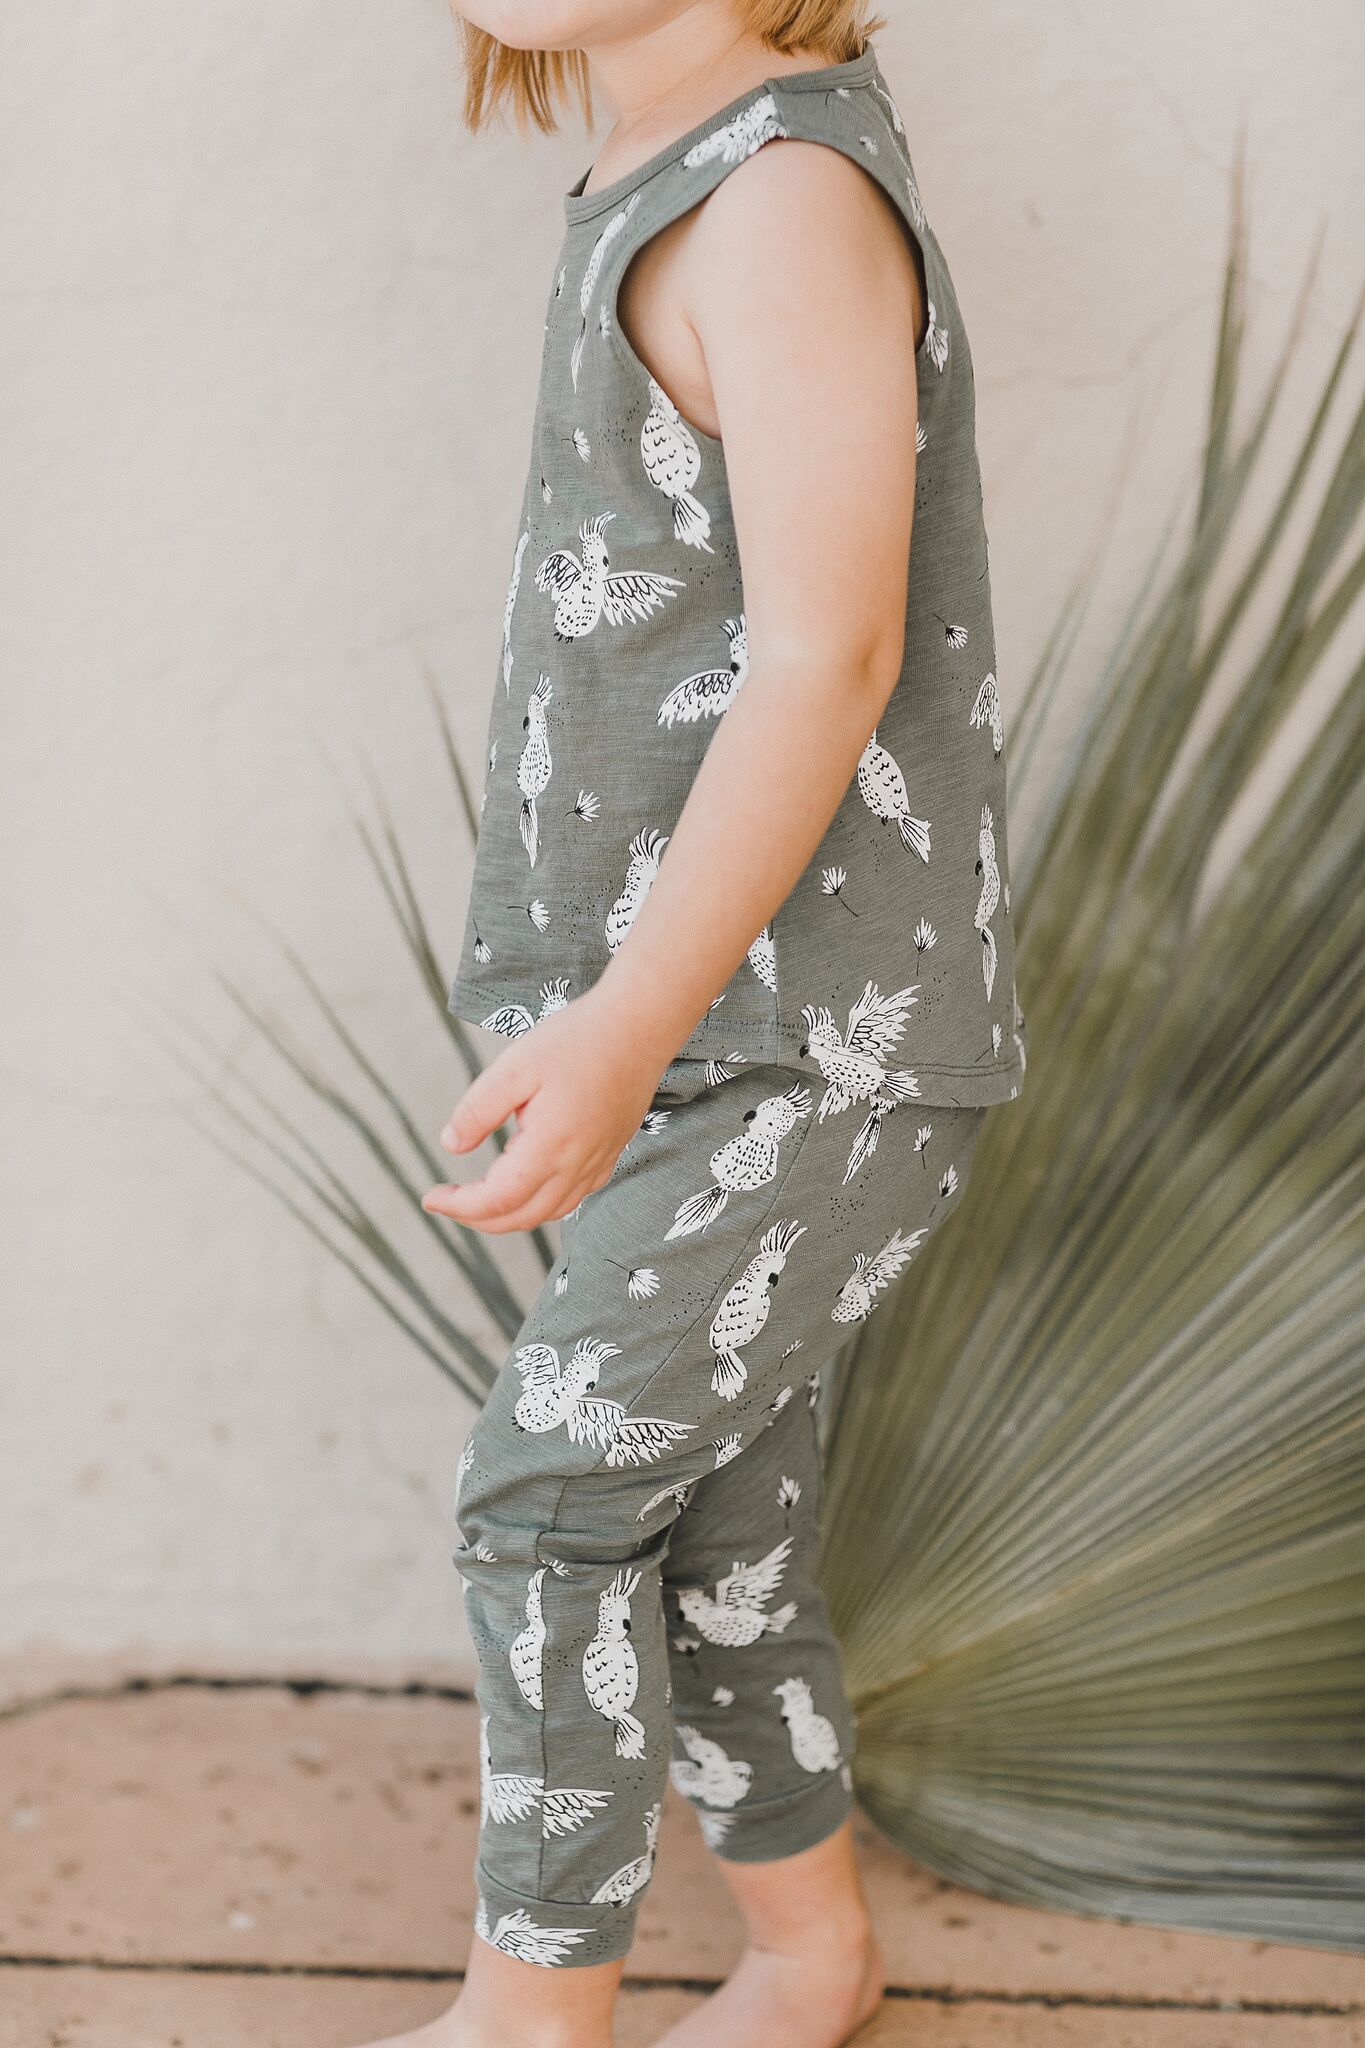                                                                                                                       Cockatoo slouch pant